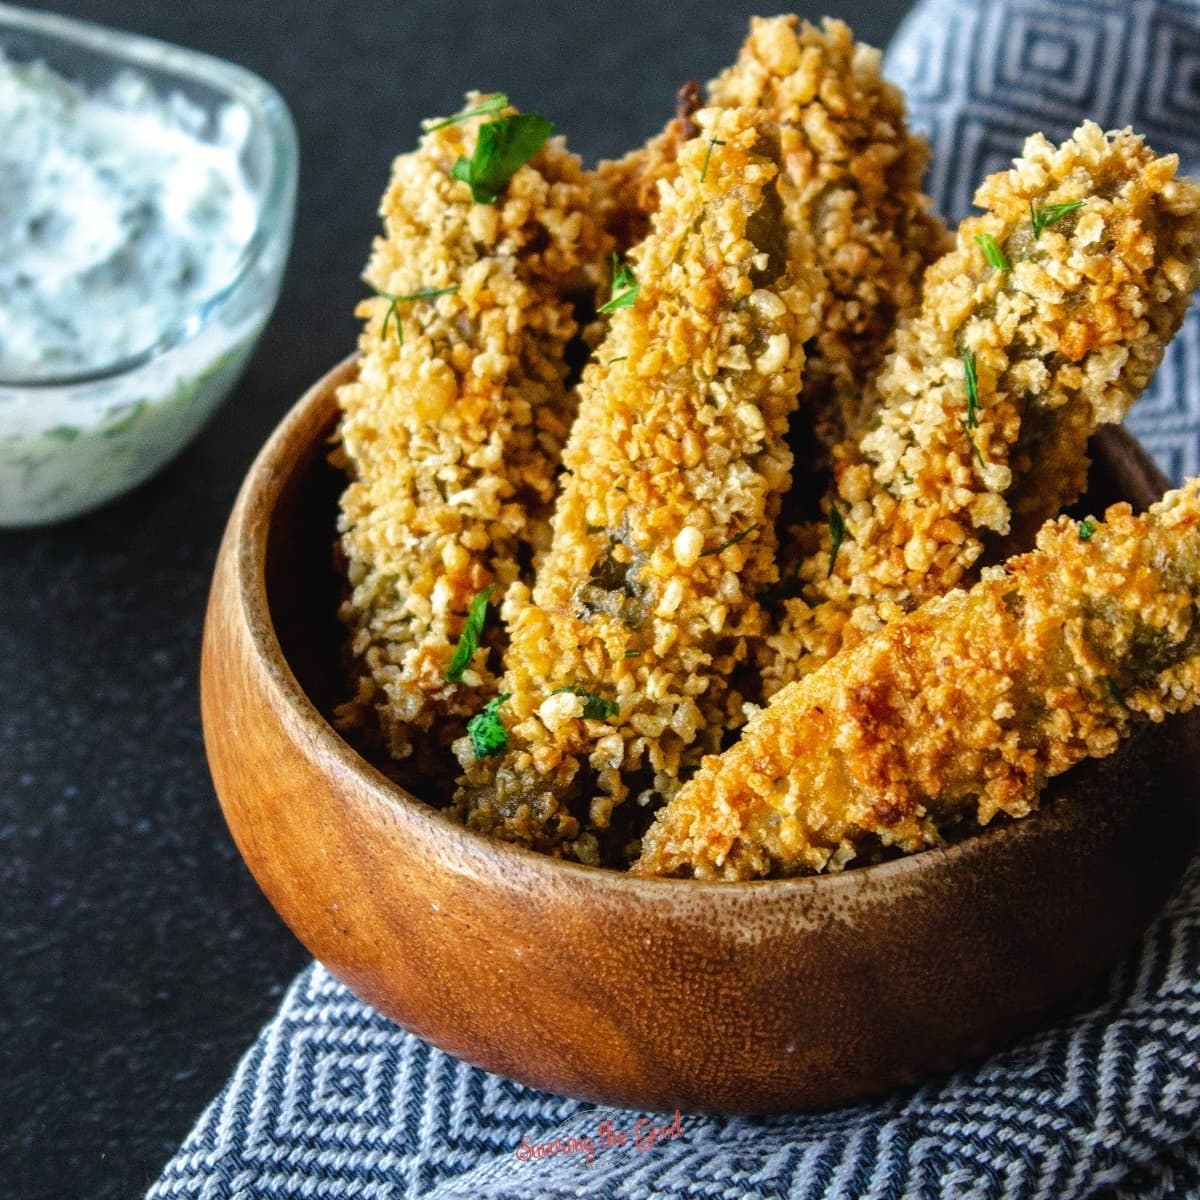 Fried Pickle Spears. Disneyland Fried Pickles square image